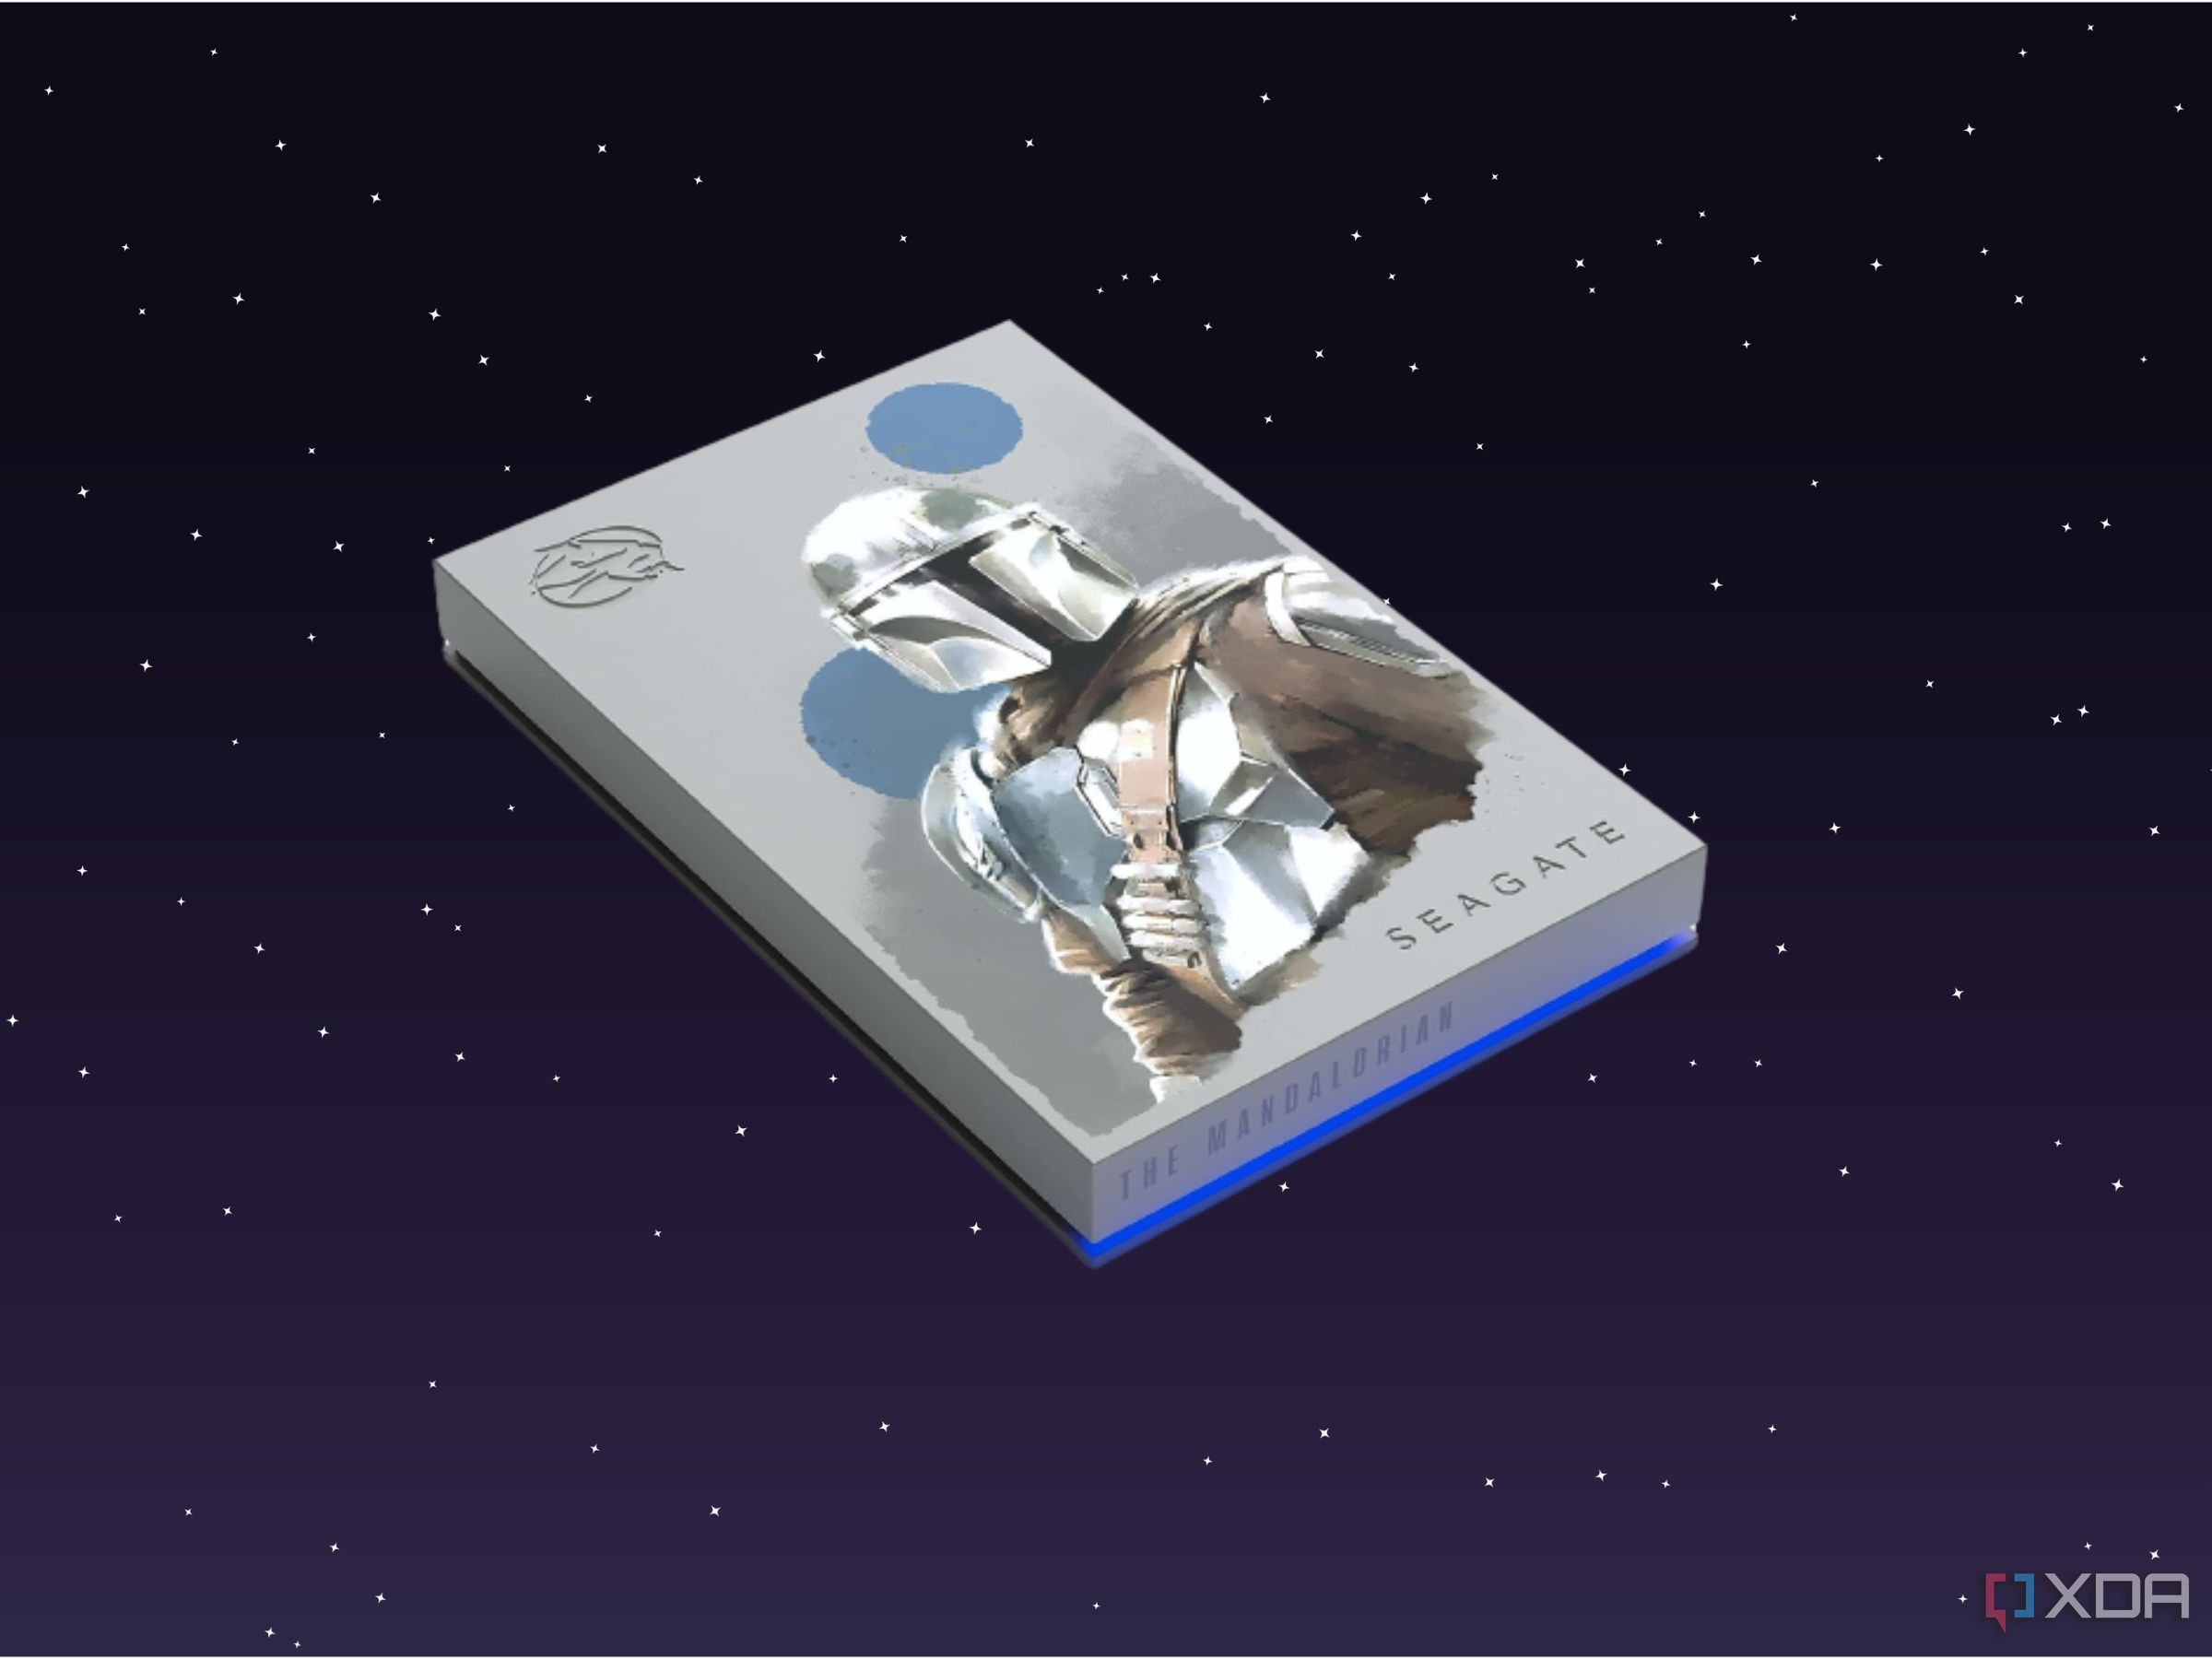 A Mandalorian themed hard drive pictured in front of a starry background